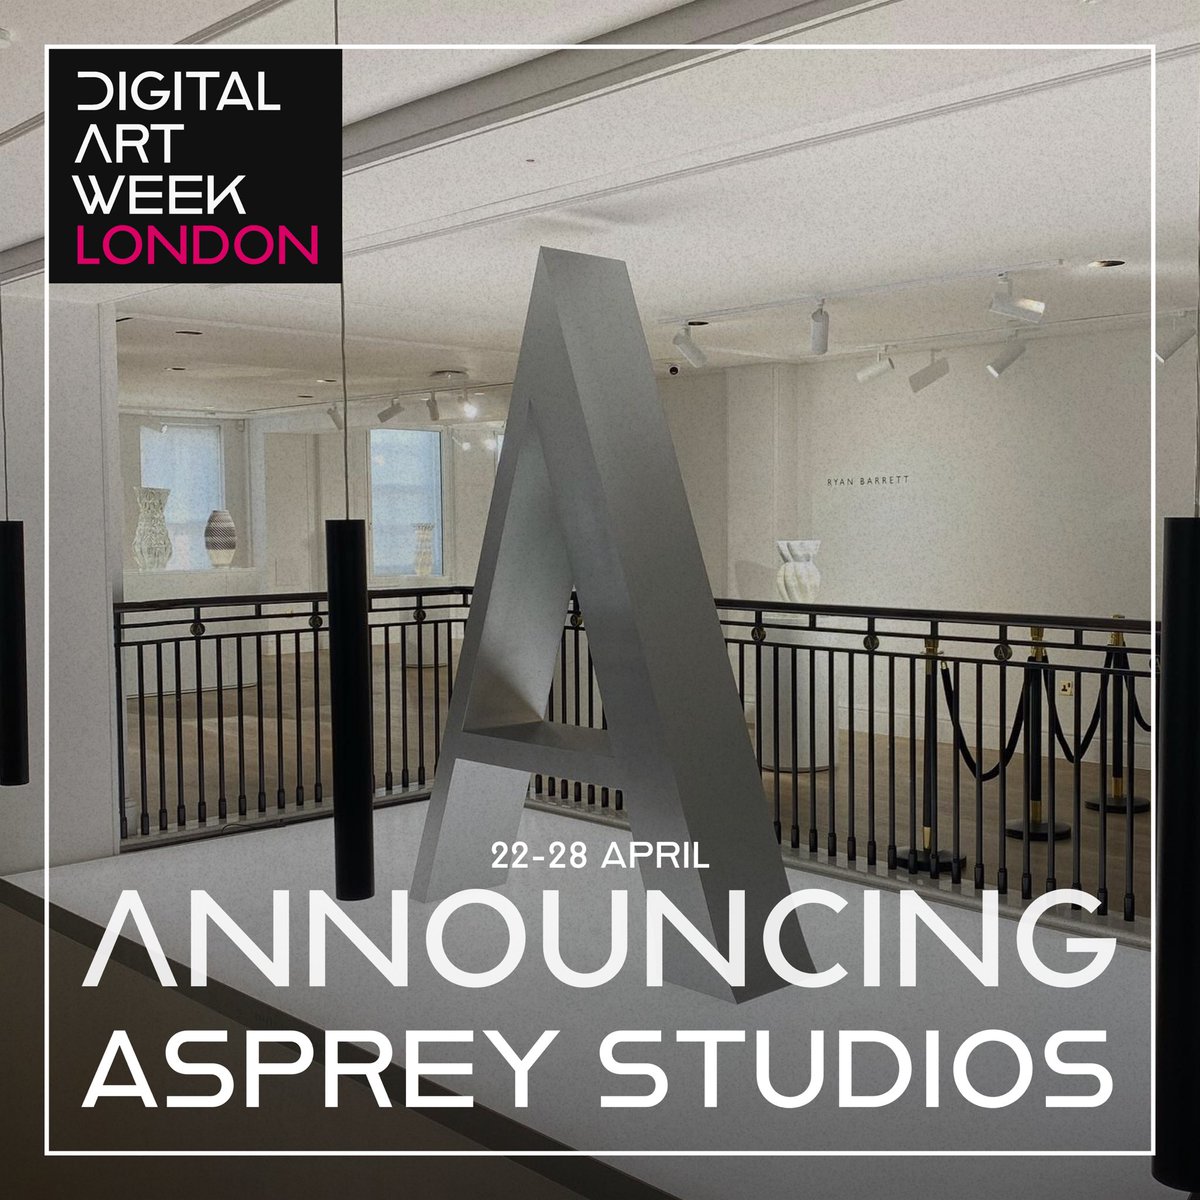 Asprey Studio was formed to explore the connection between digital and physical pieces and the rise of the digital art medium. @AspreyStudio creates unique collections using new and traditional production techniques as well as one-of-a-kind creations with its partners and